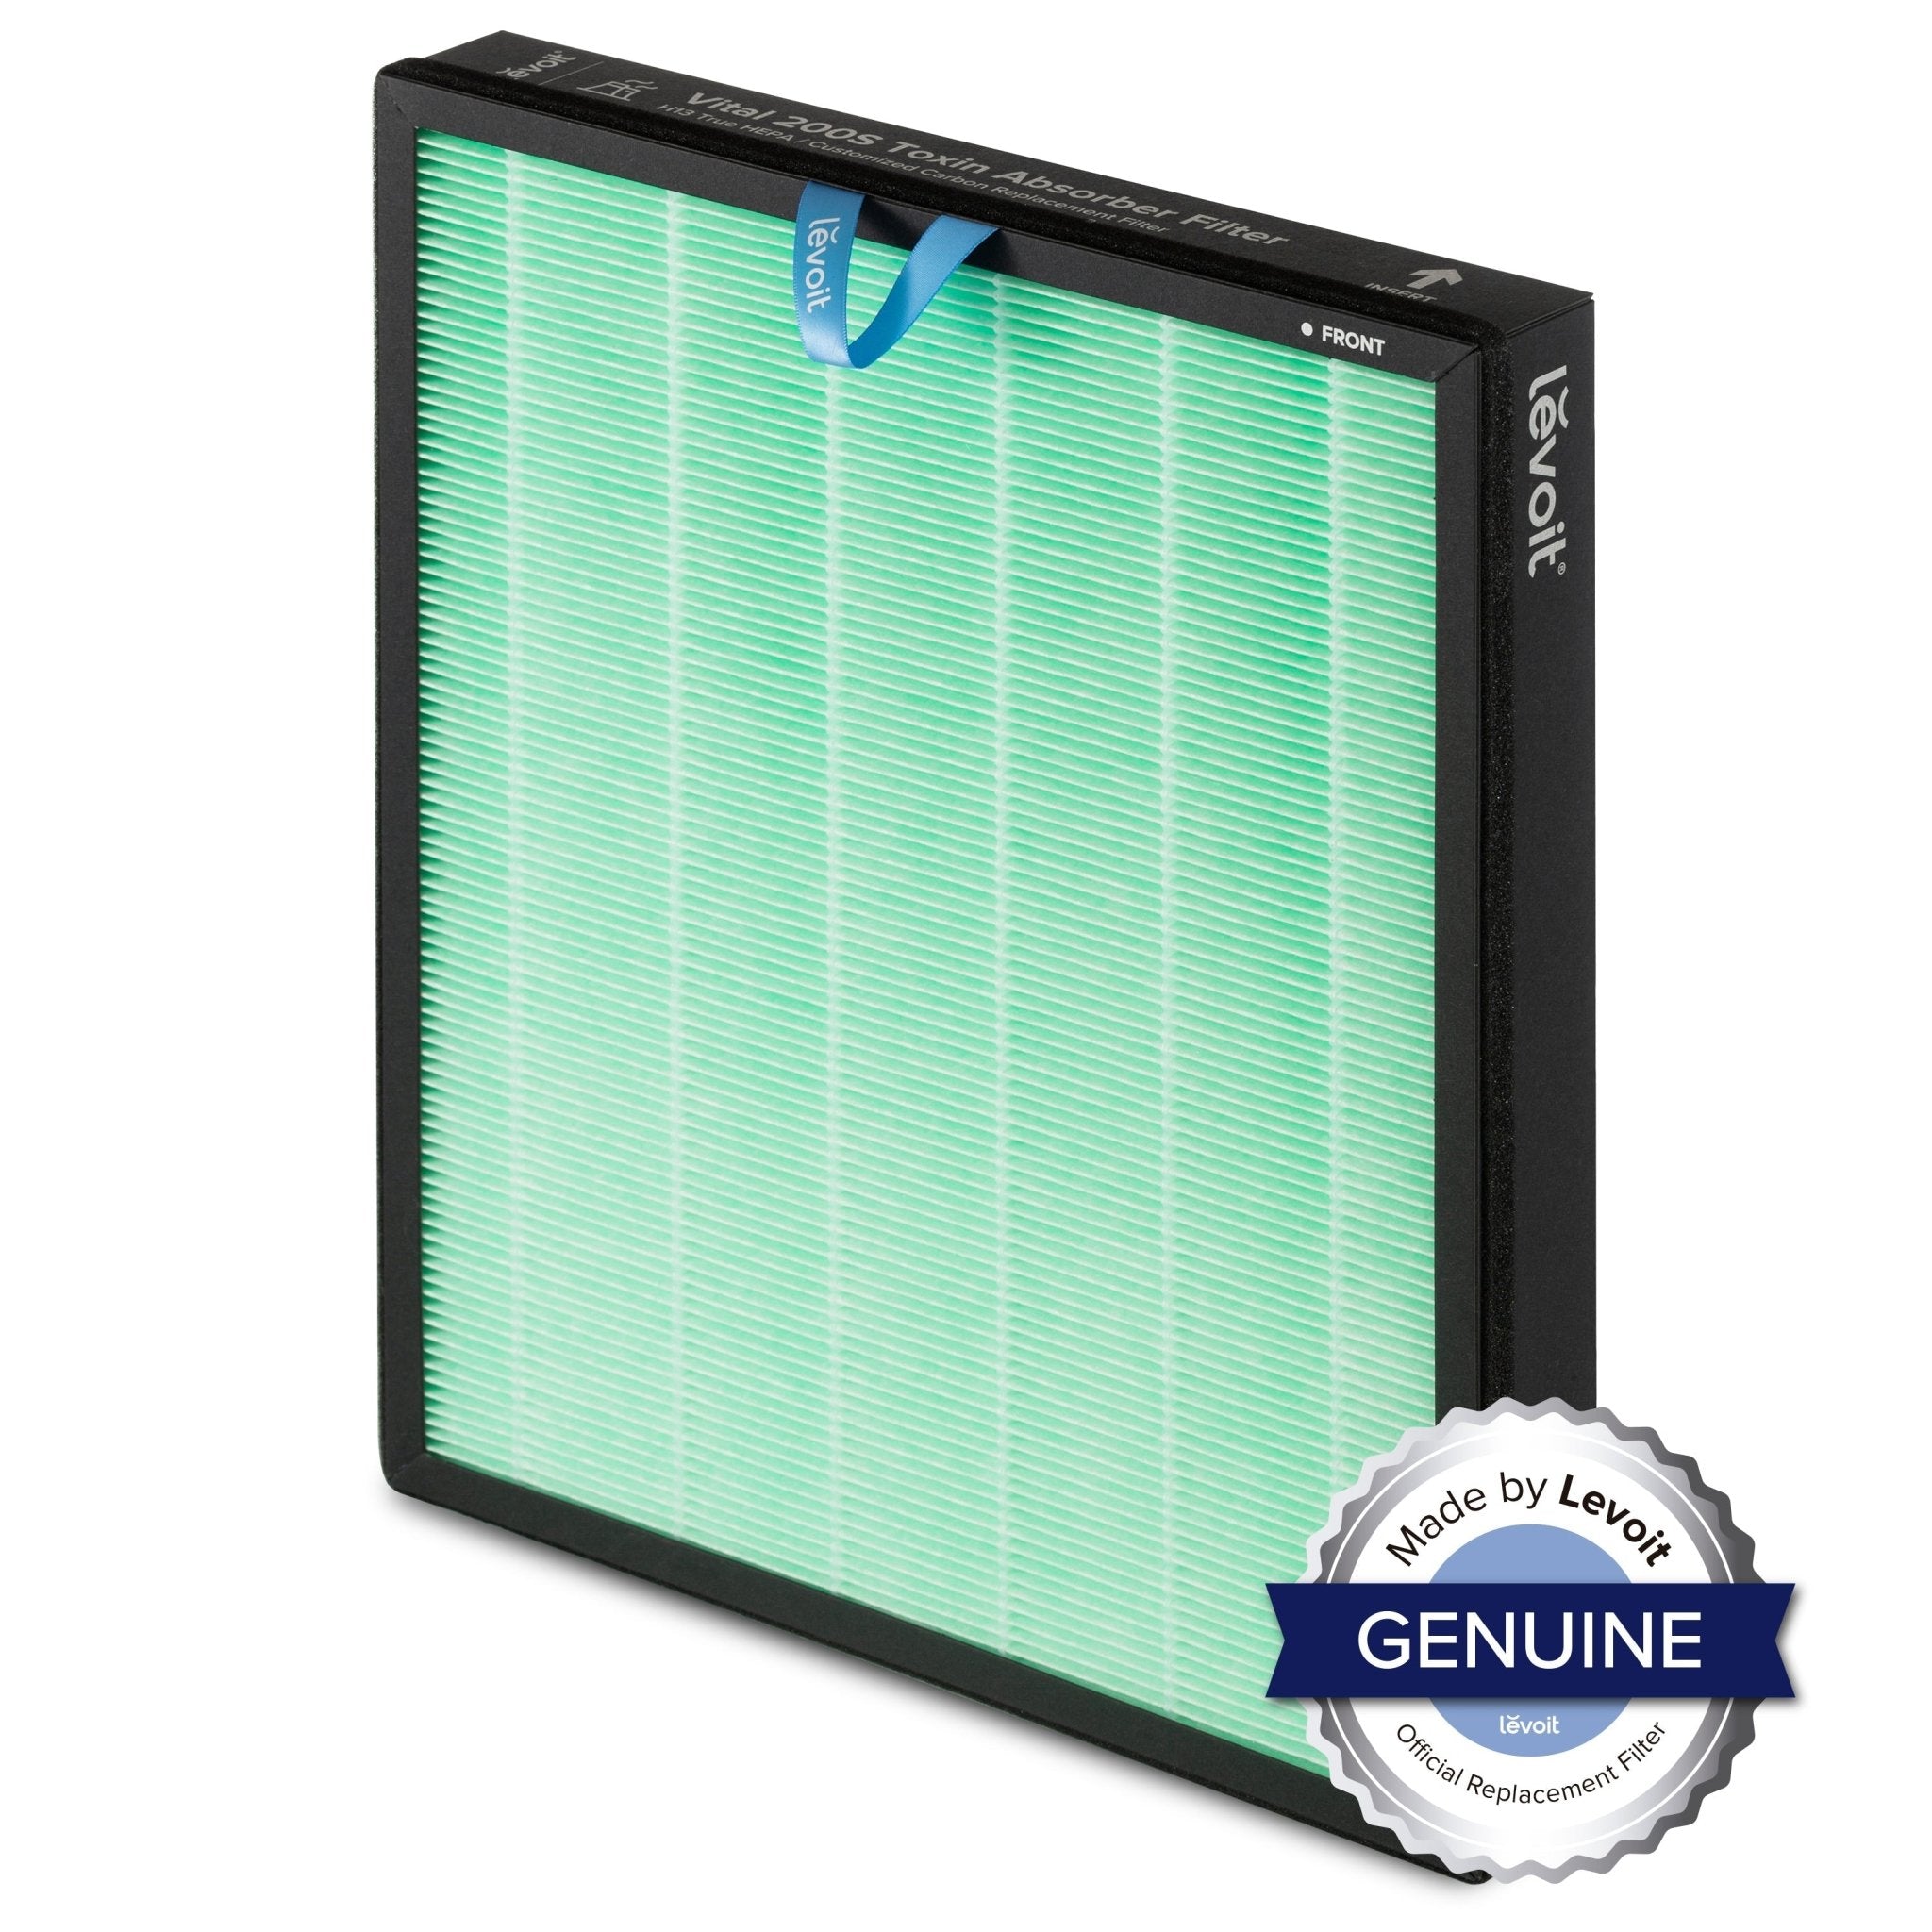 Vital 200S True HEPA + Toxin Absorber Carbon Replacement Filter